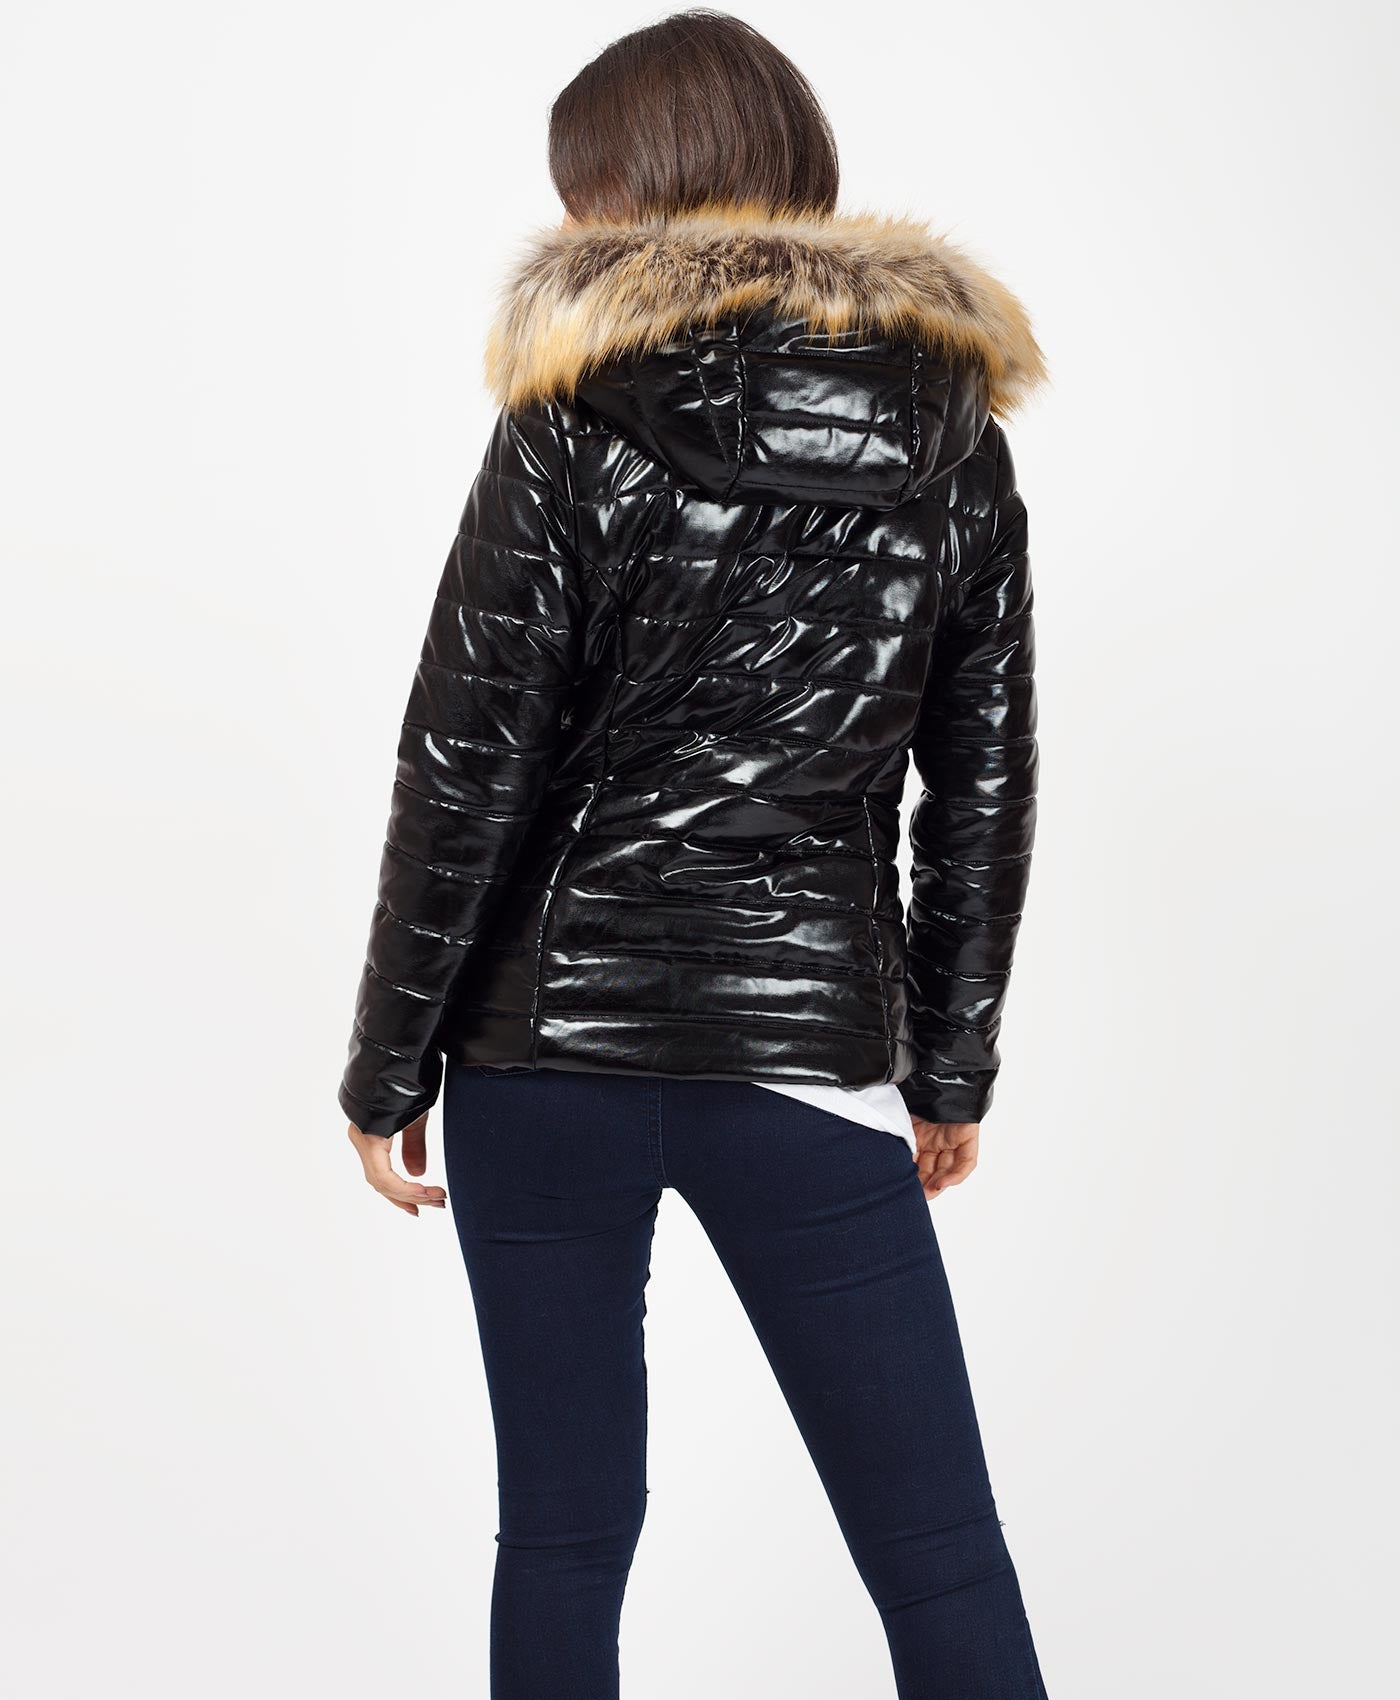 Black-Wet-Look-Mnclr-Style-Faux-Fur-Hooded-Quilted-Jacket-4